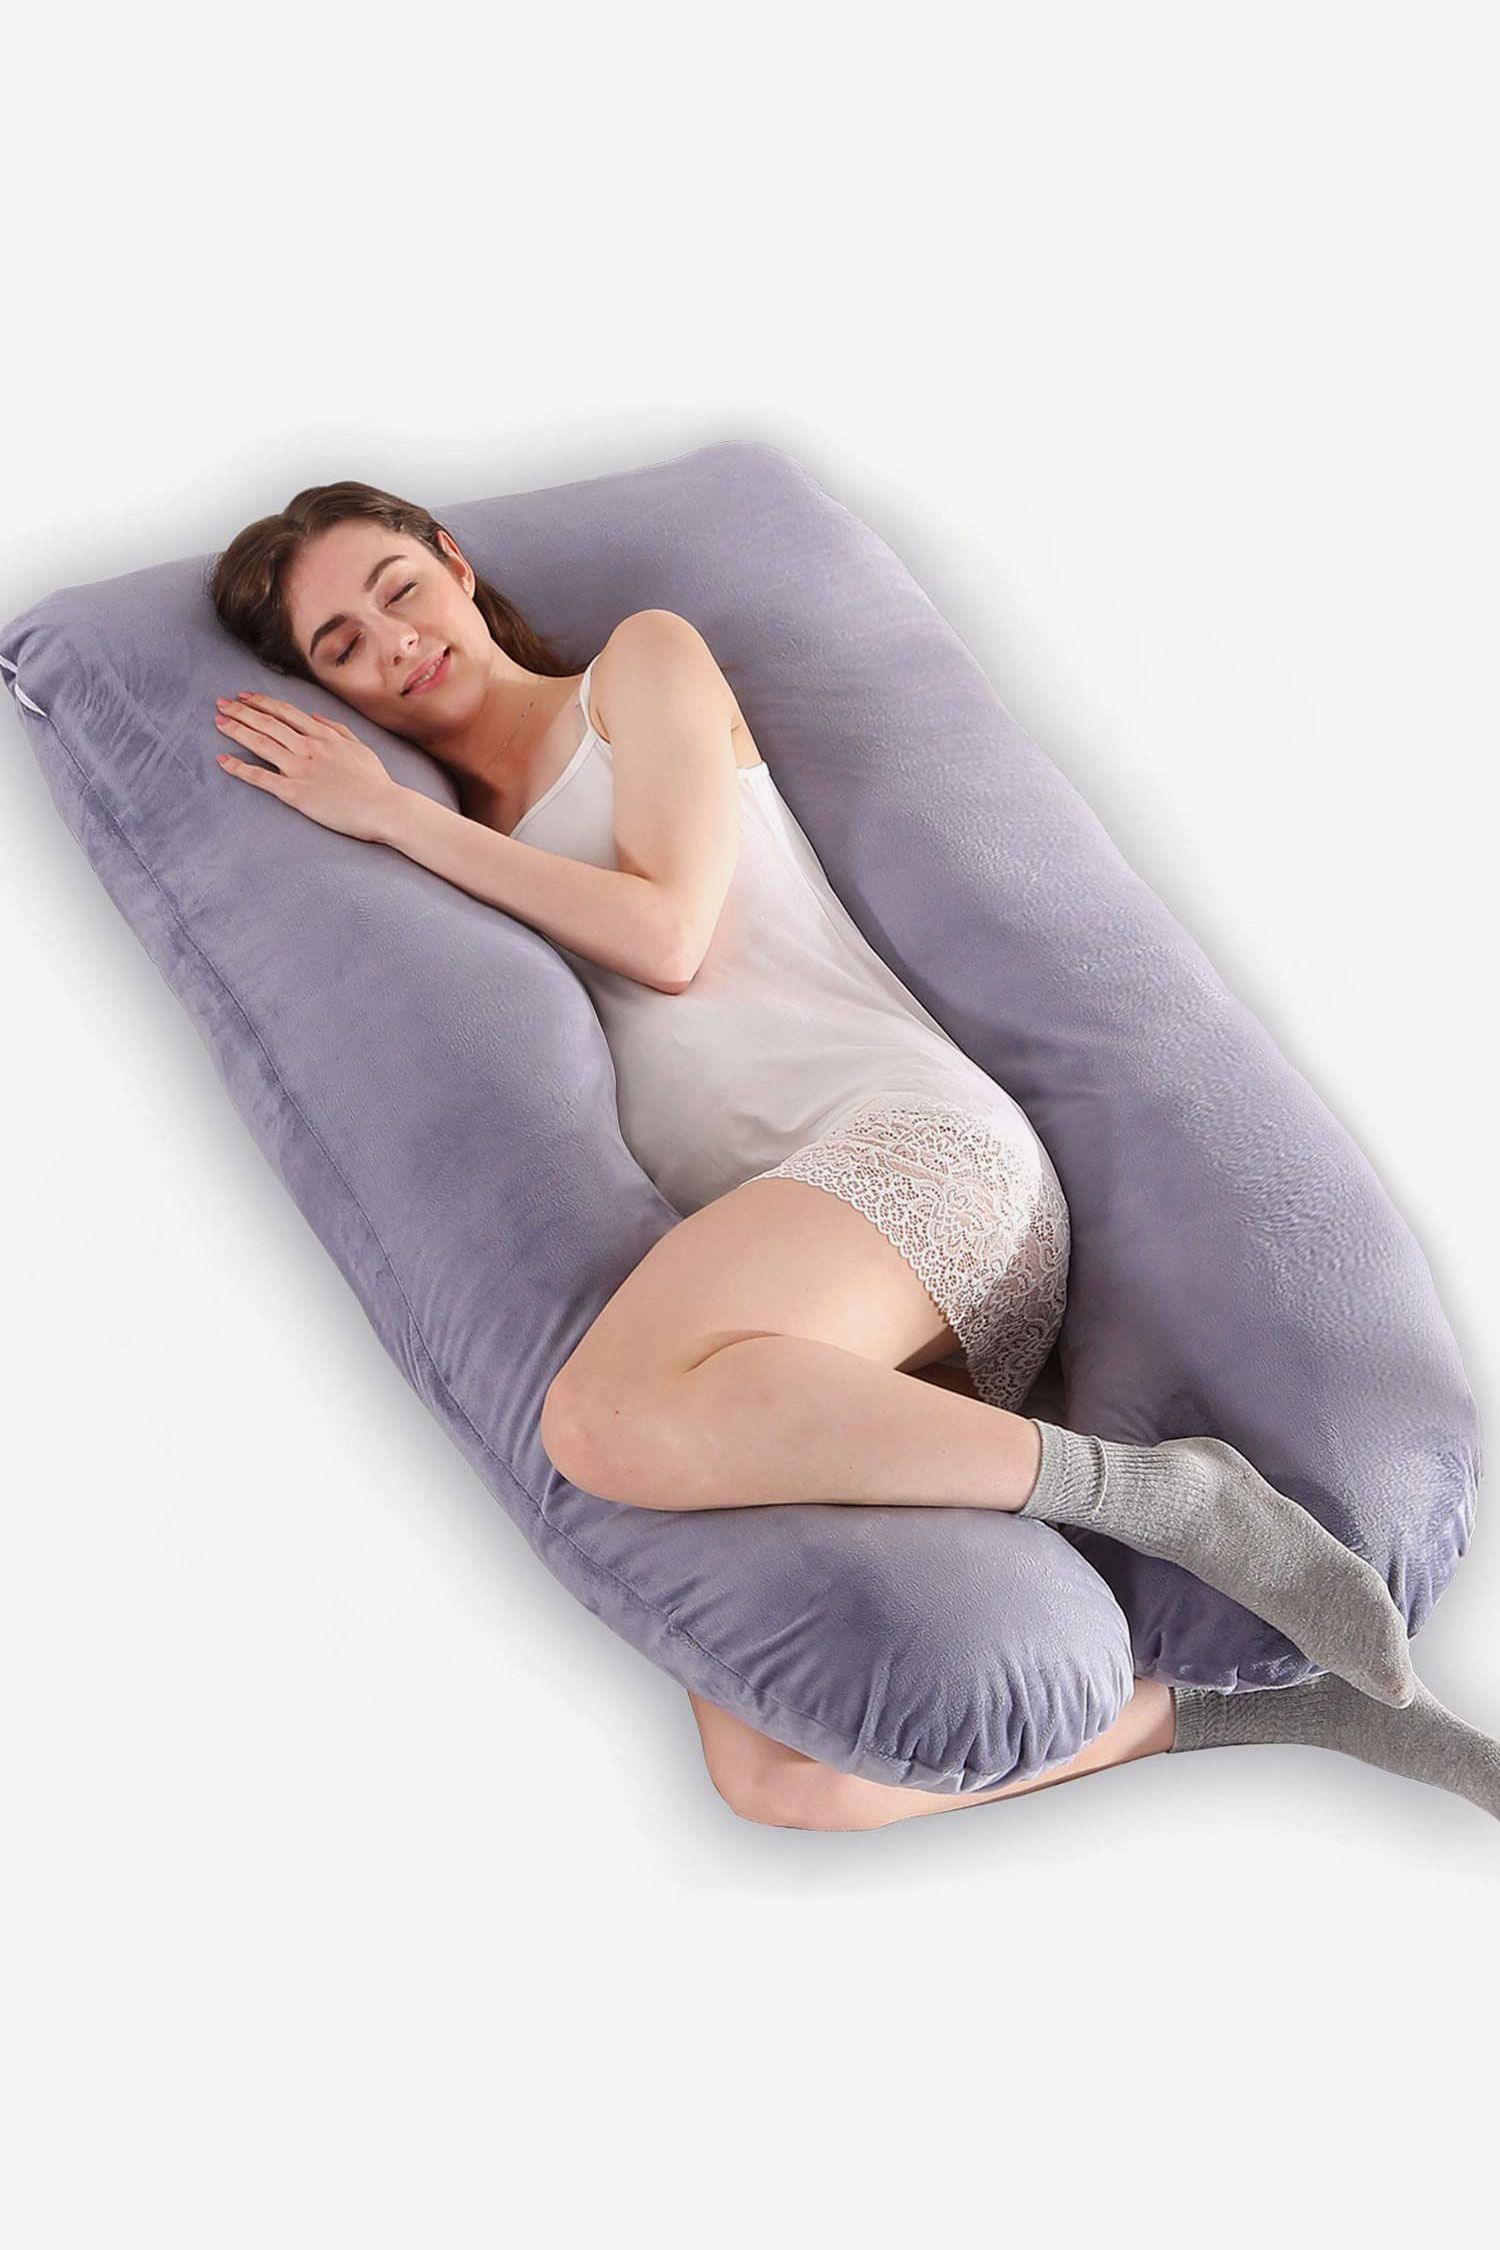 Details about   A Pregnancy Pillow The Best Pregnancy Pillow for Sleeping Prone Pregnancy Body 